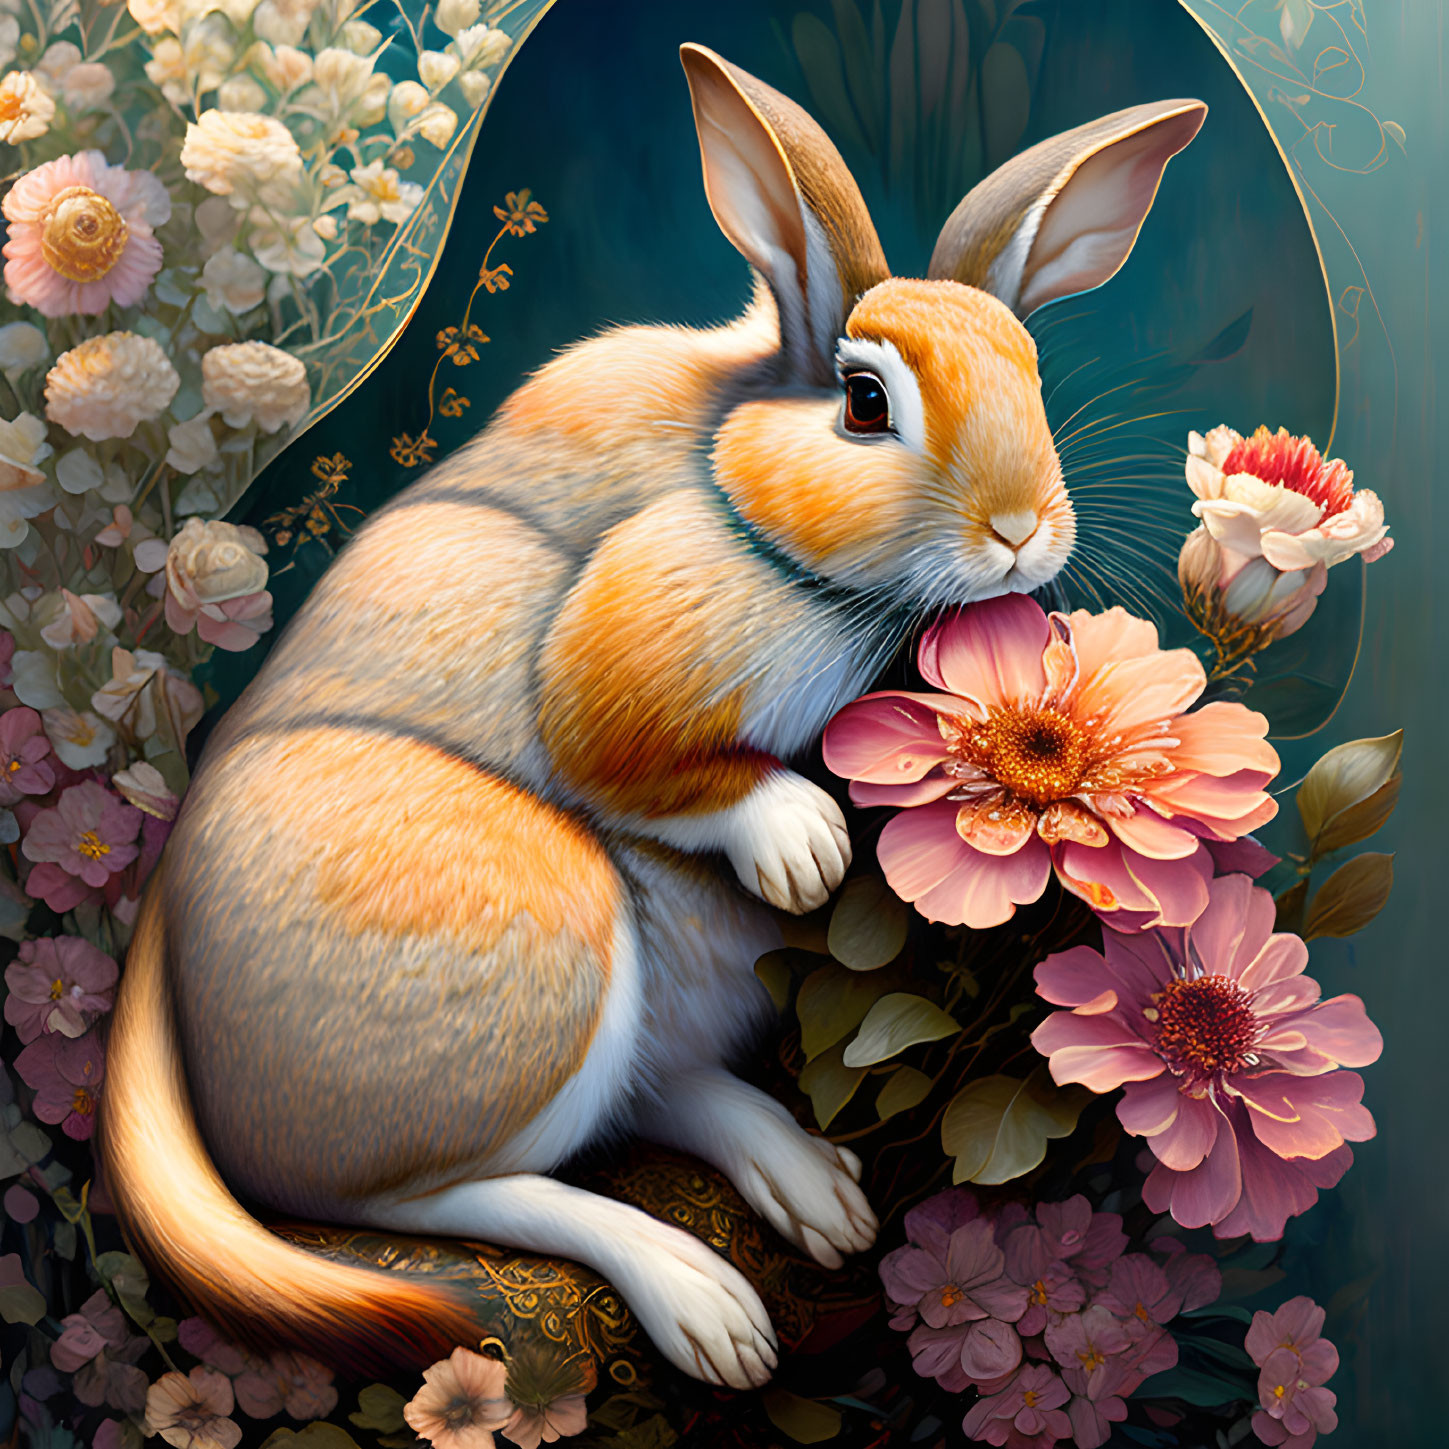 Illustrated rabbit with flowers on dark background, ornate details and soft glow.